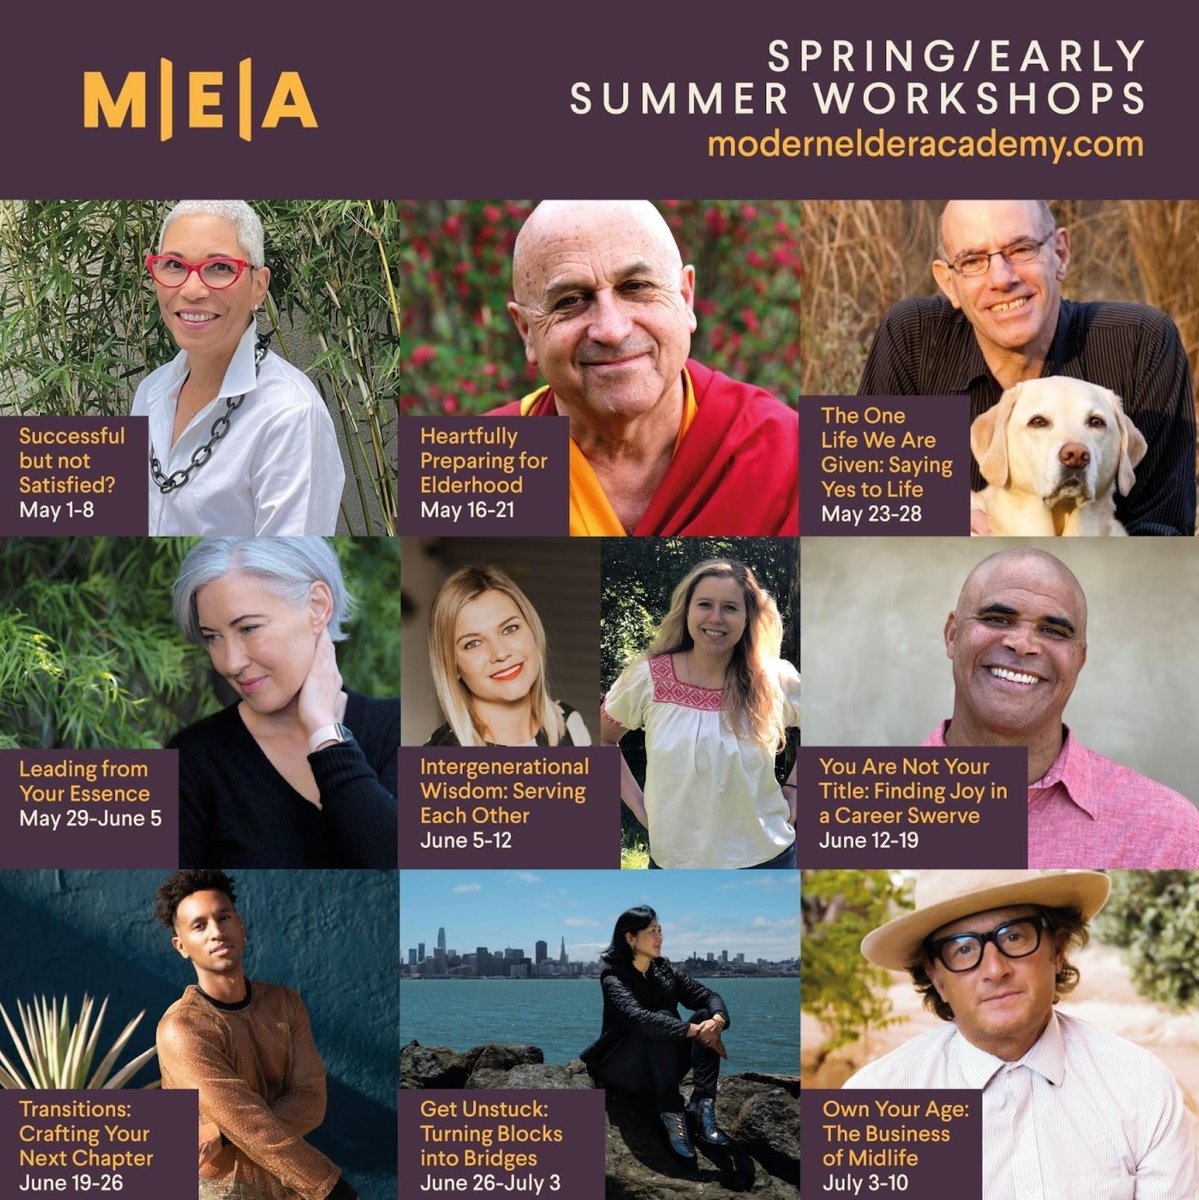 'It's Finally Time to Come To Baja' This morning's Wisdom Well post shares our MEA Spring & Summer workshop lineup: bit.ly/3CTTmU7 Join us on 3/22 for an online event on The Power of Reflection in Uncertain Times. Register here: bit.ly/3LcFEyL